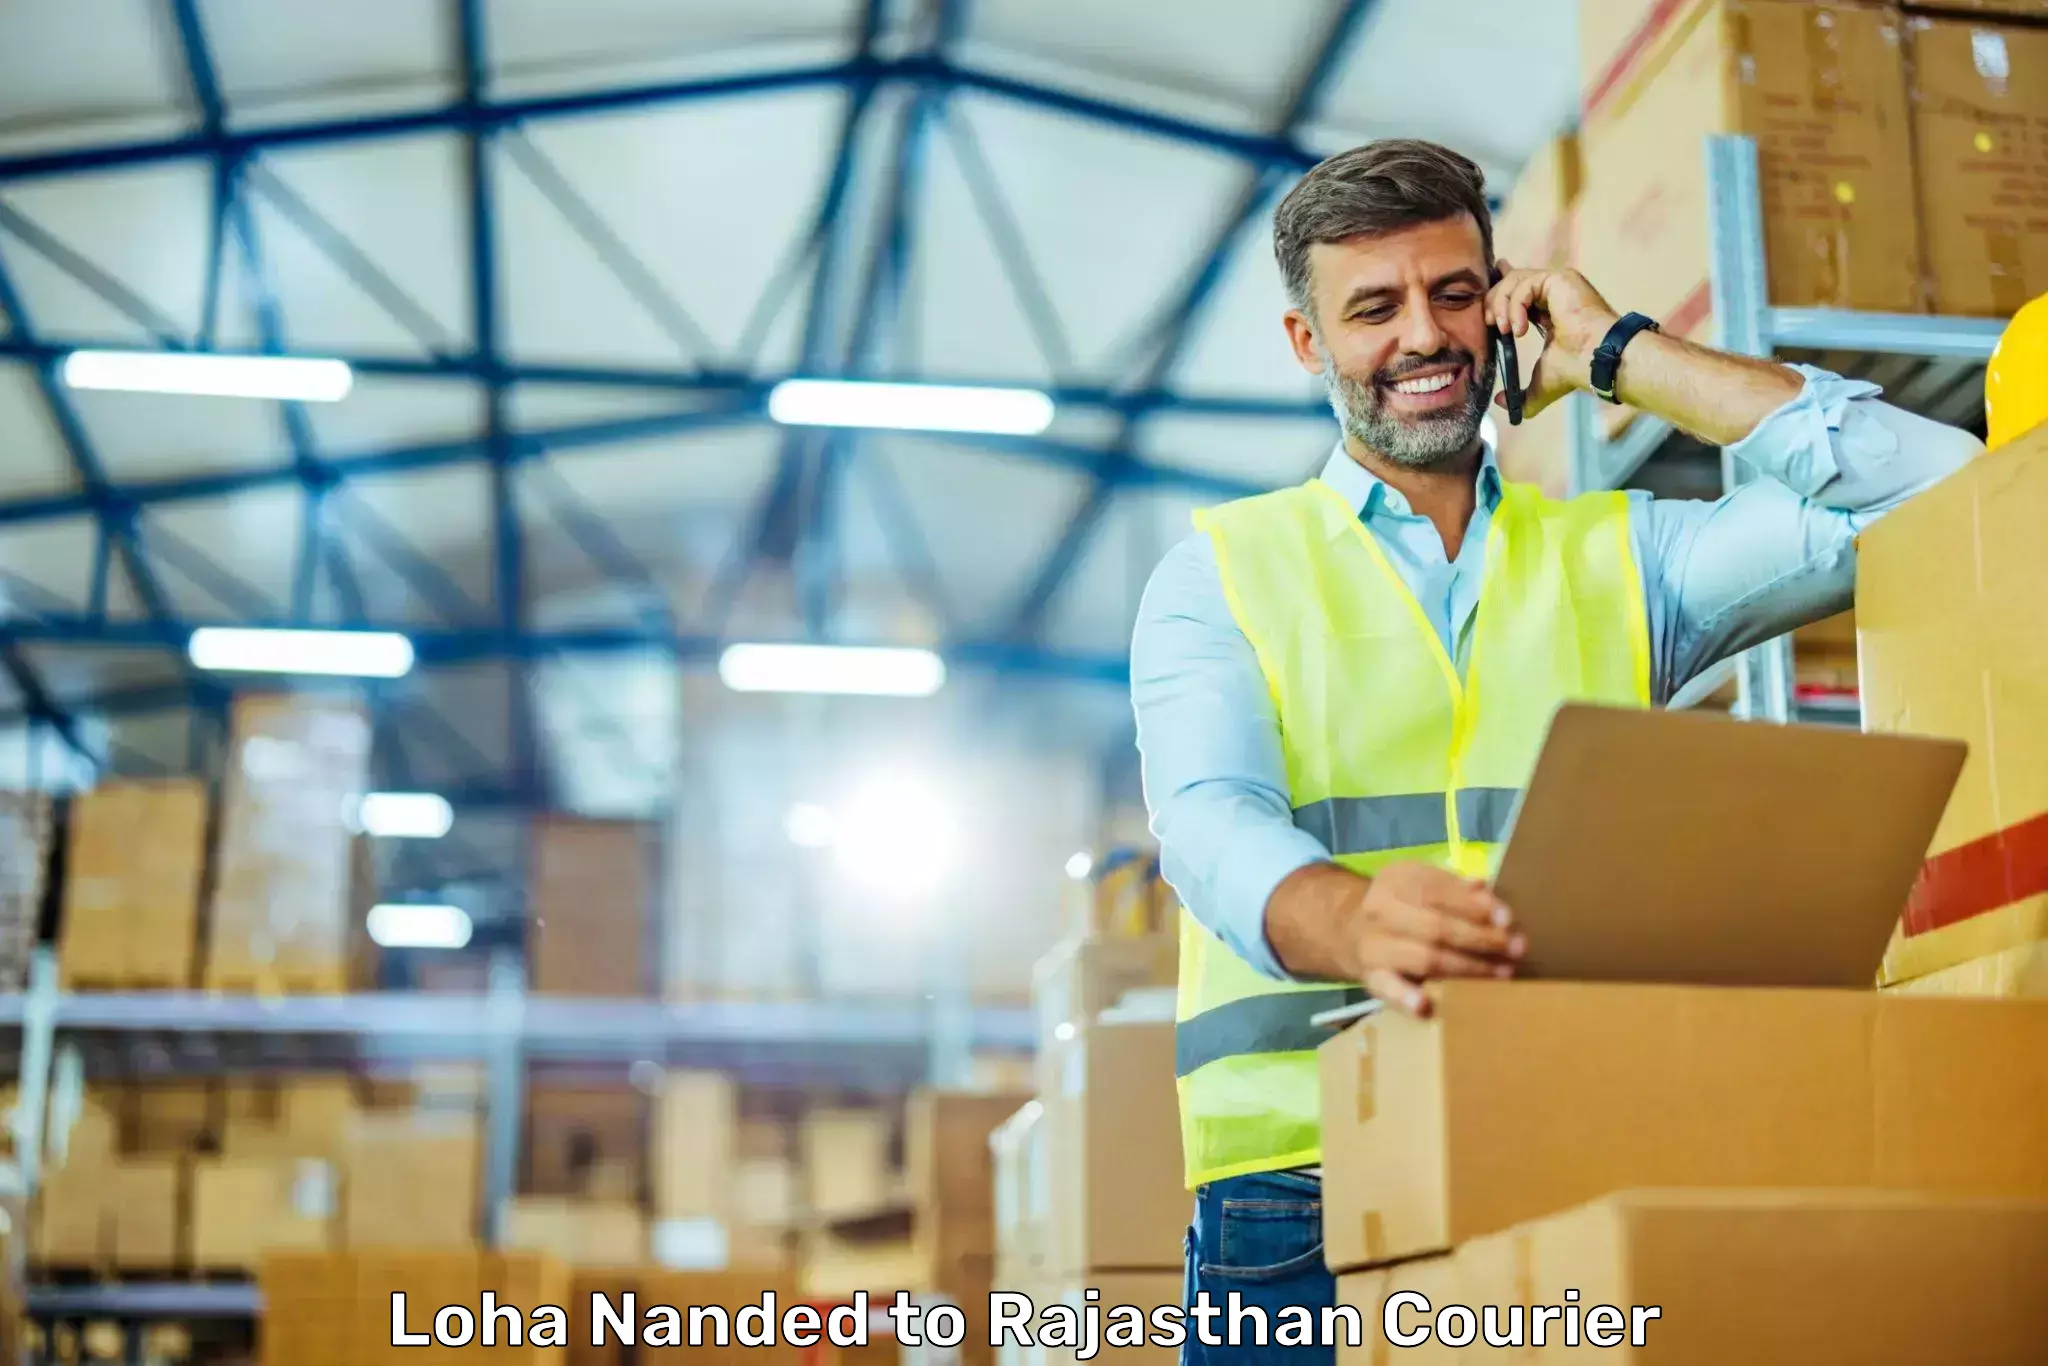 Urban courier service Loha Nanded to Rajasthan